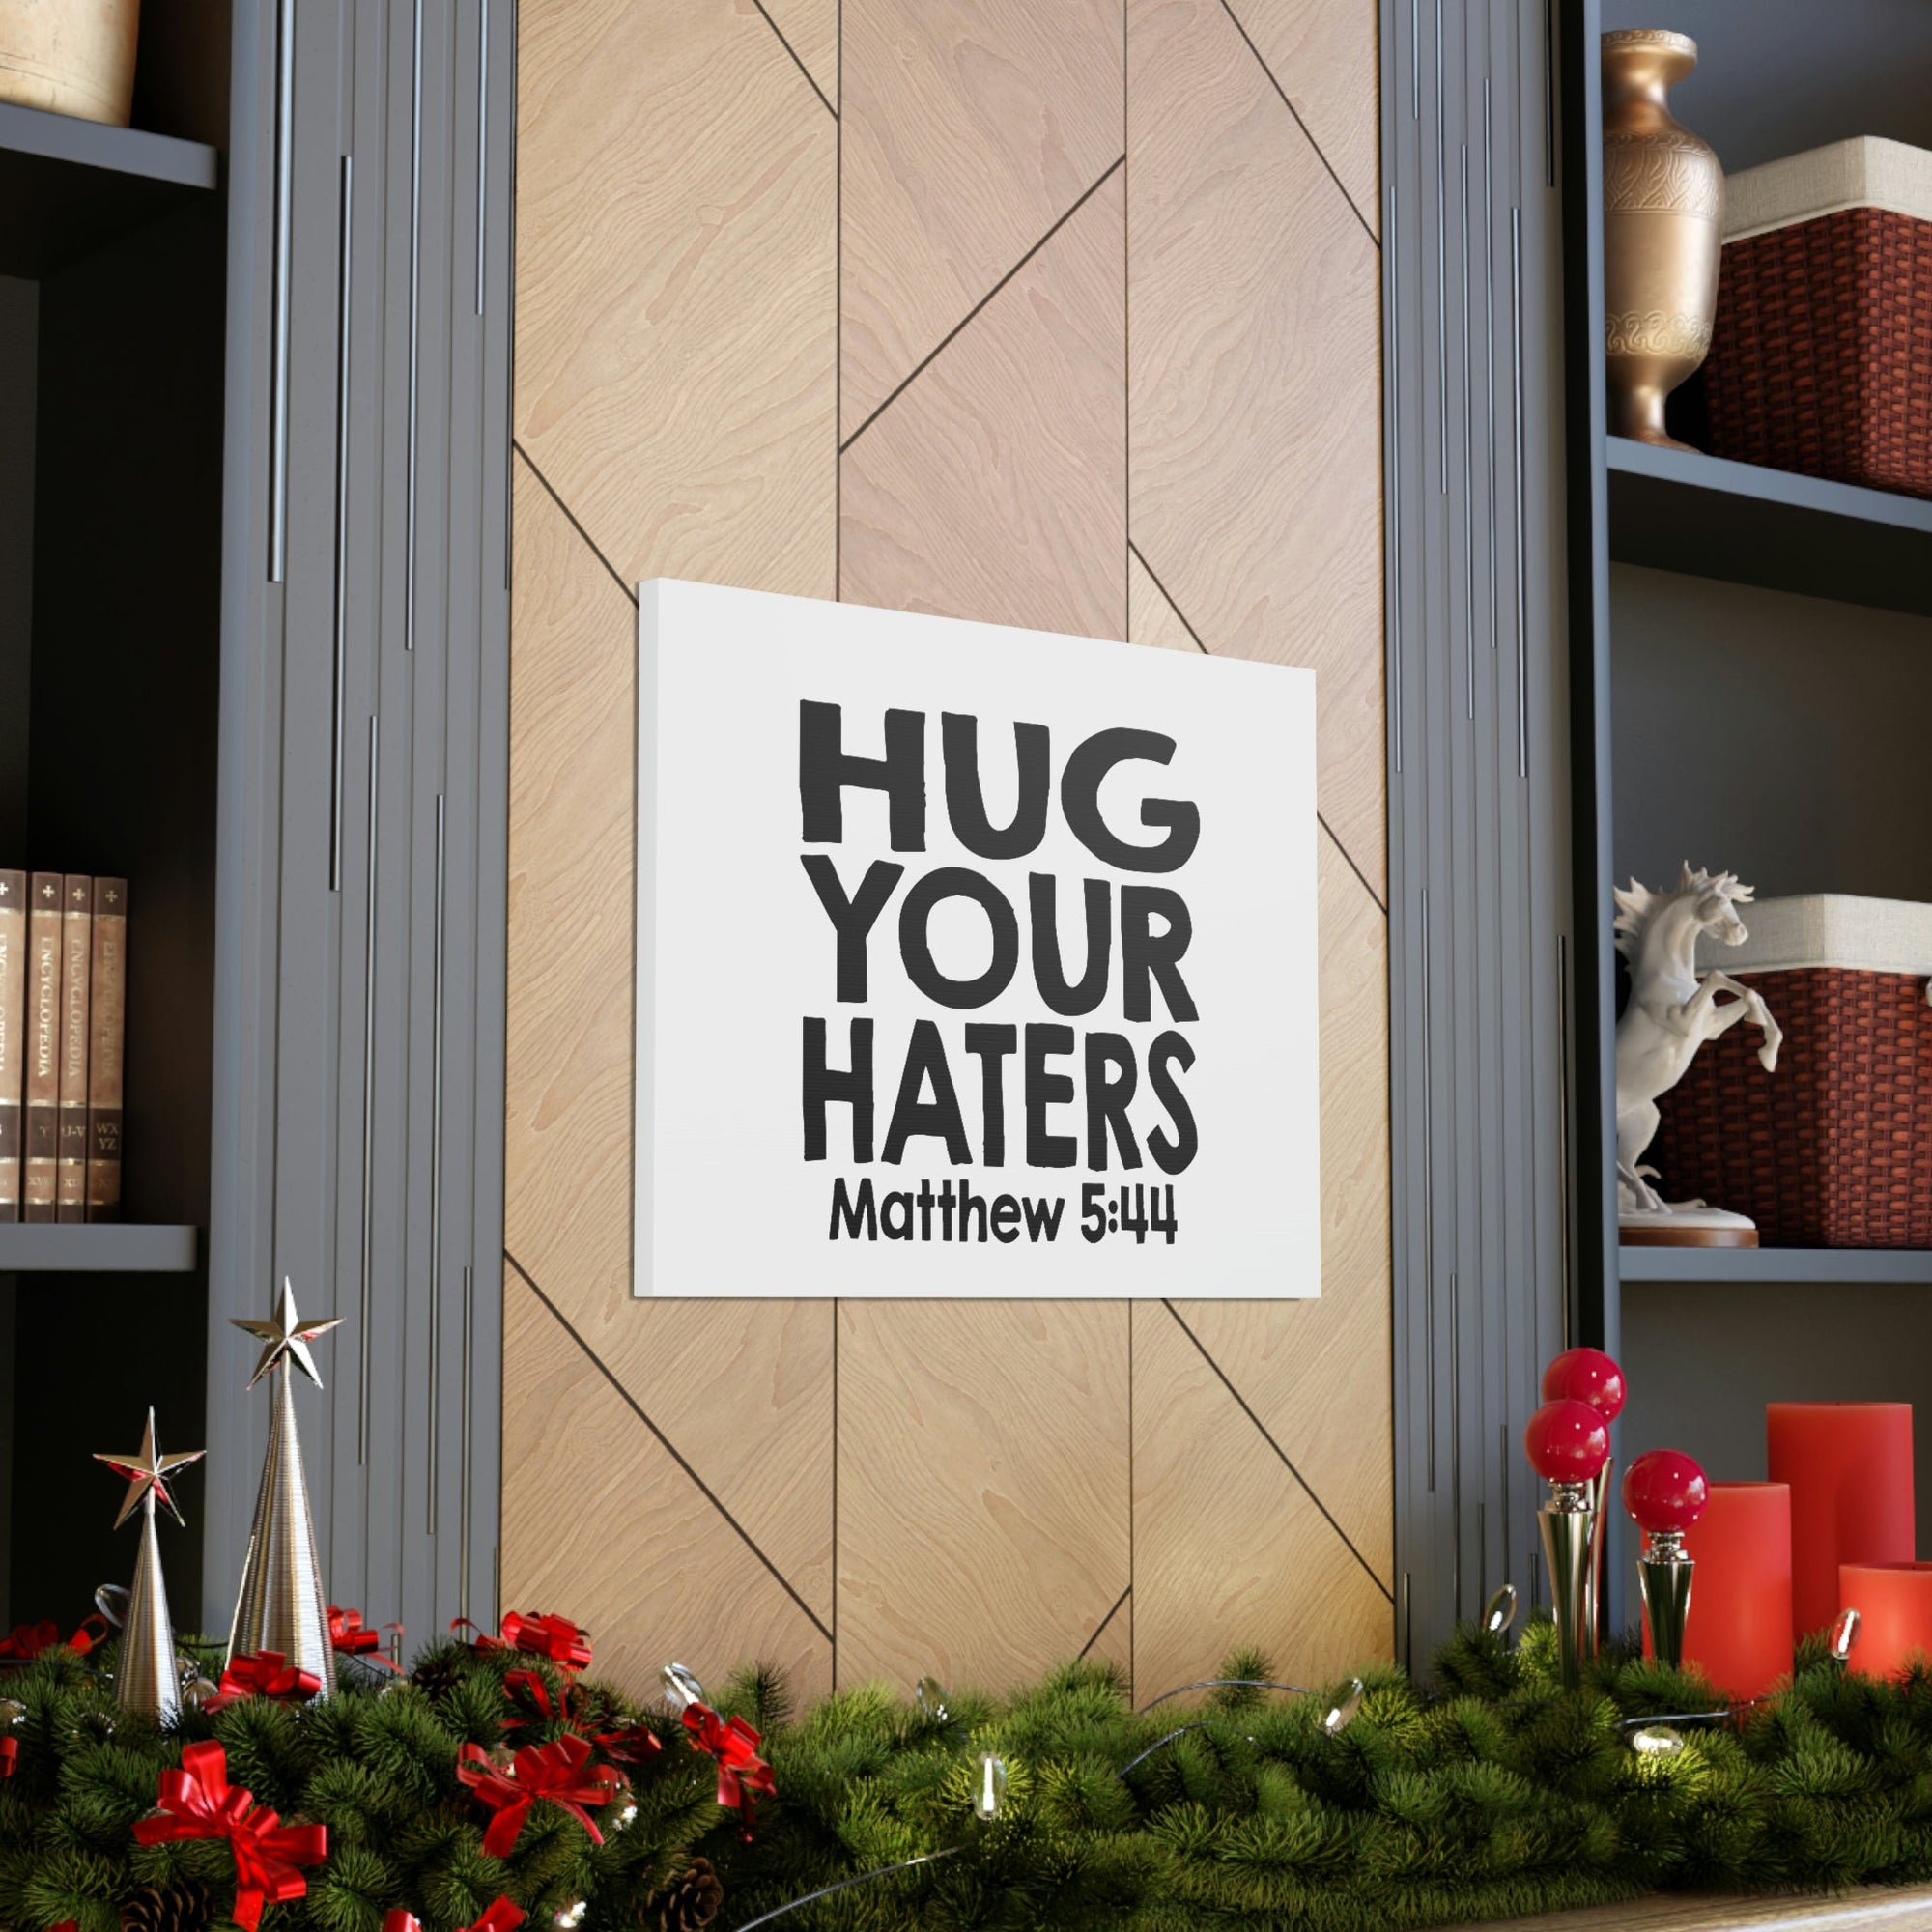 Scripture Walls Hug Your Haters Matthew 5:44 Bible Verse Canvas Christian Wall Art Ready to Hang Unframed-Express Your Love Gifts